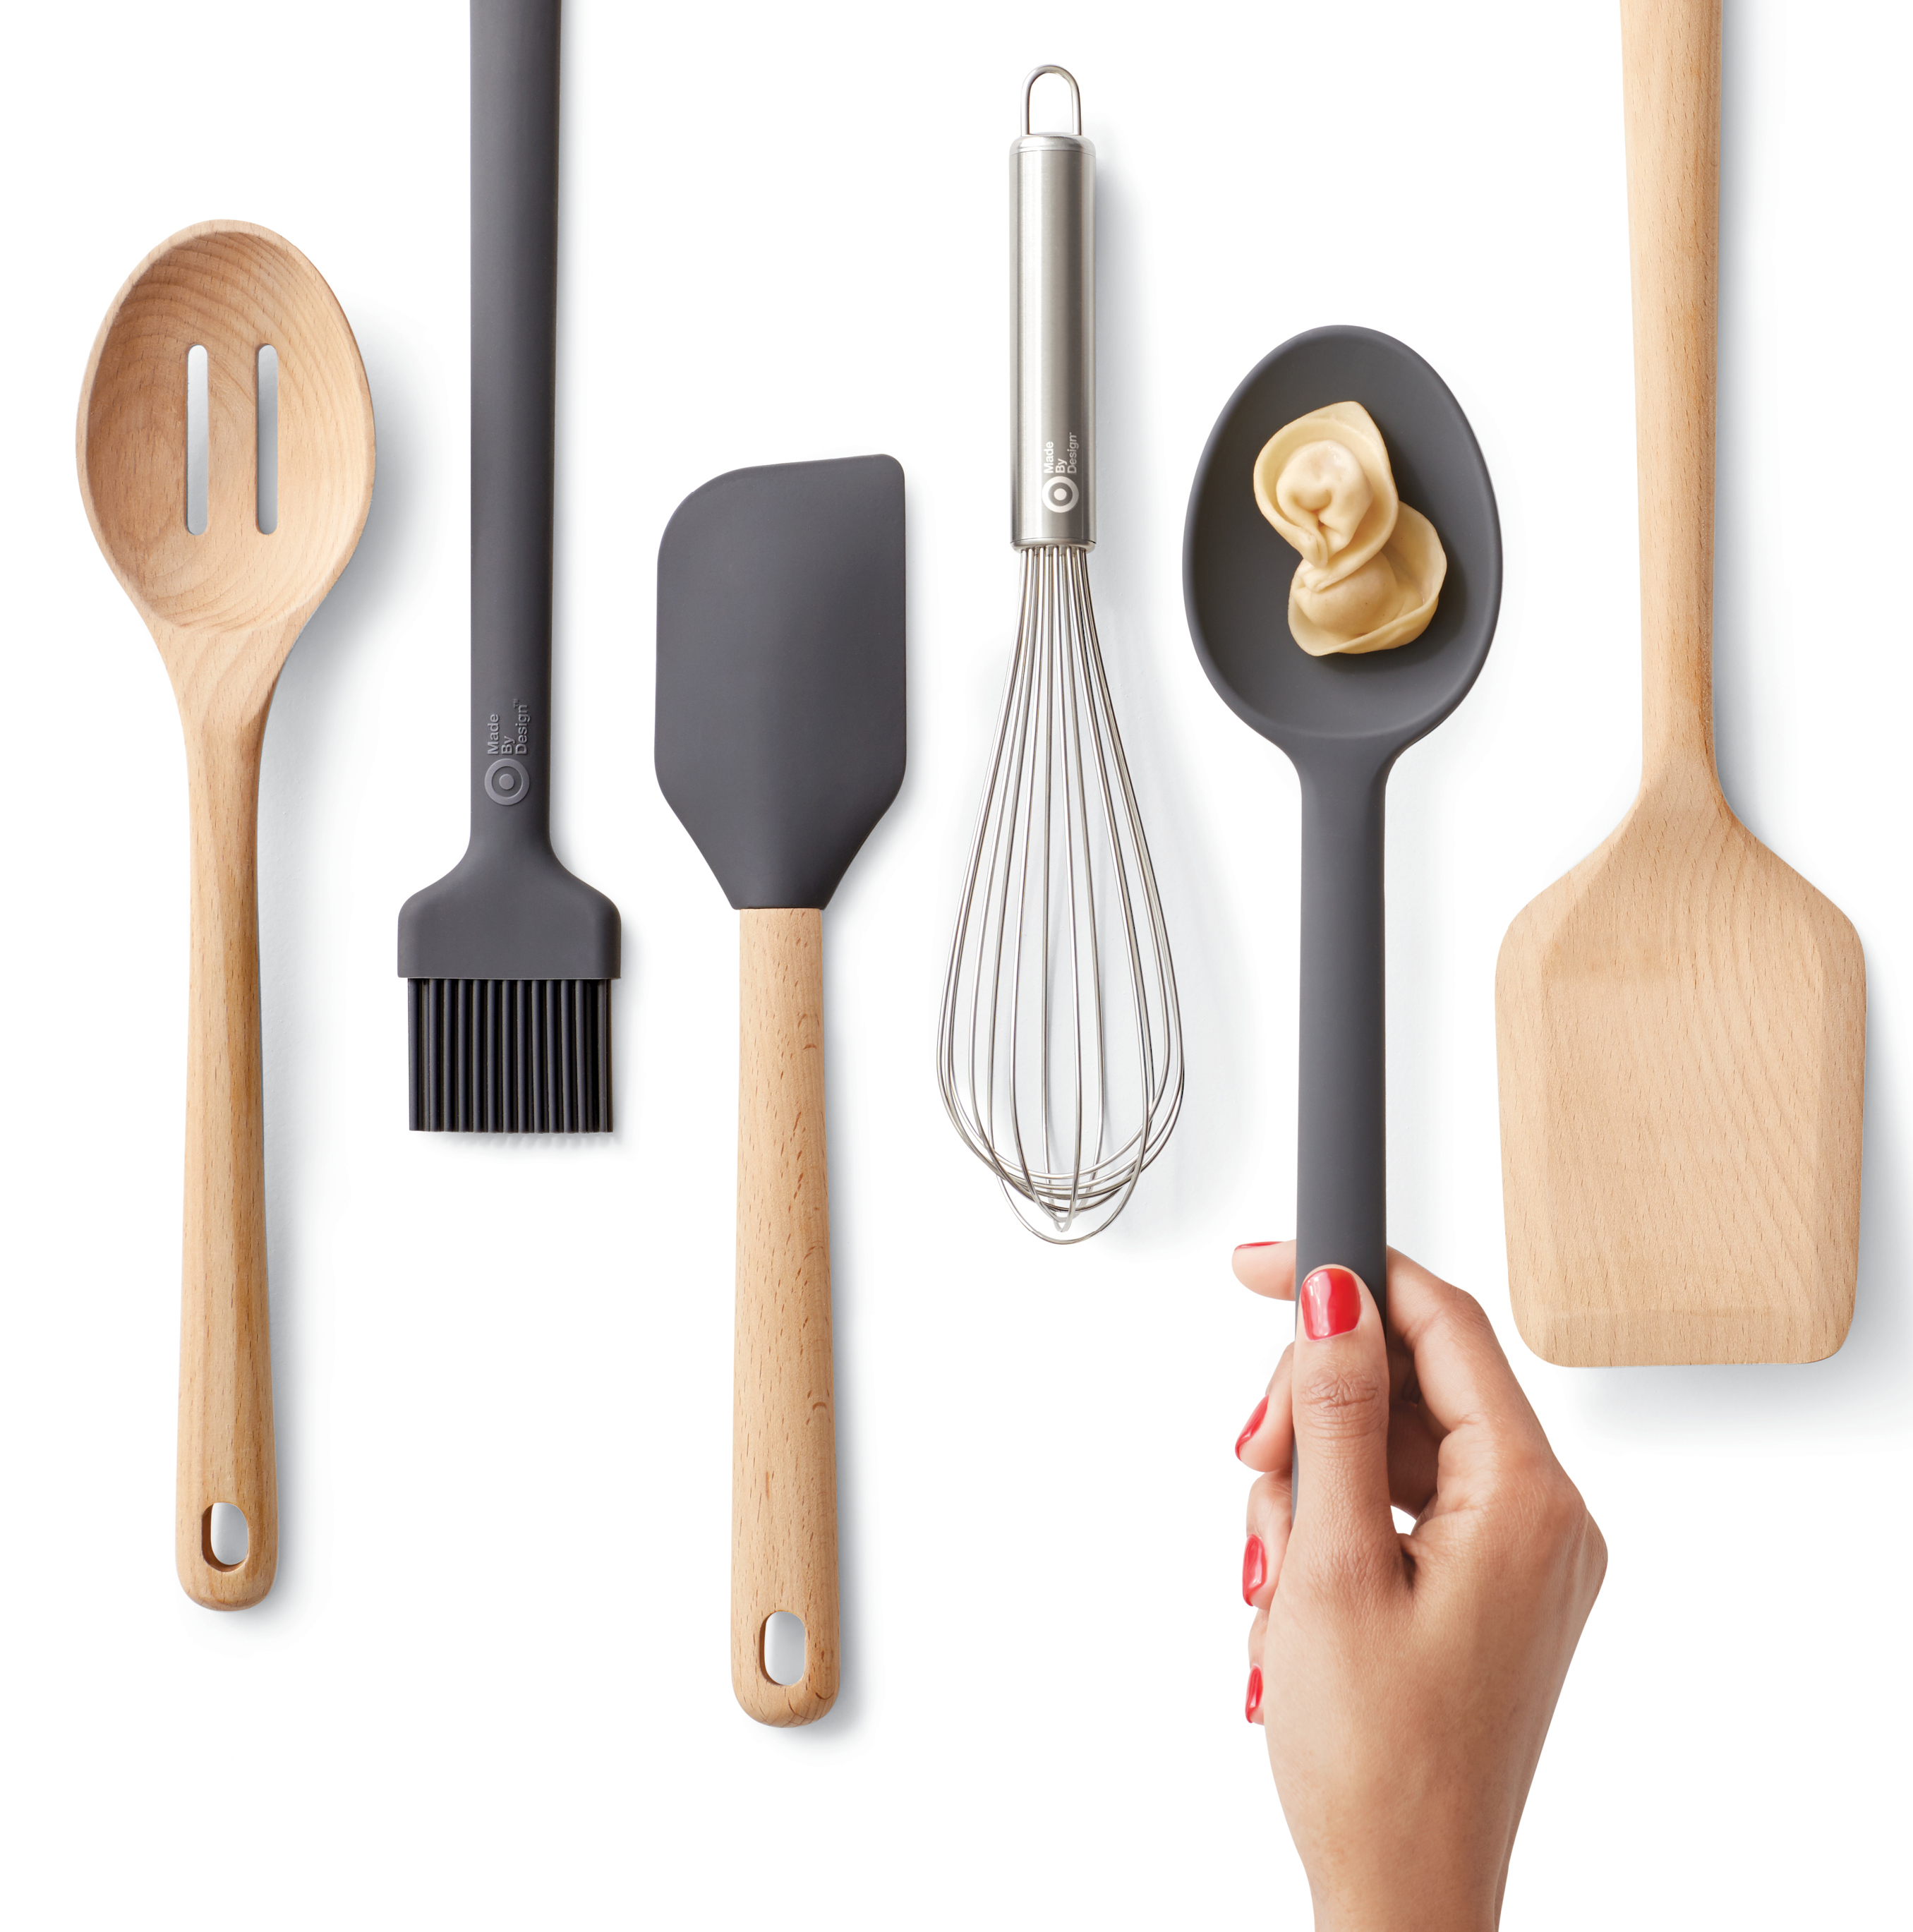 A mix of plastic and wooden kitchen utensils, including slotted and regular spoons, basting brush, spatula and whisk